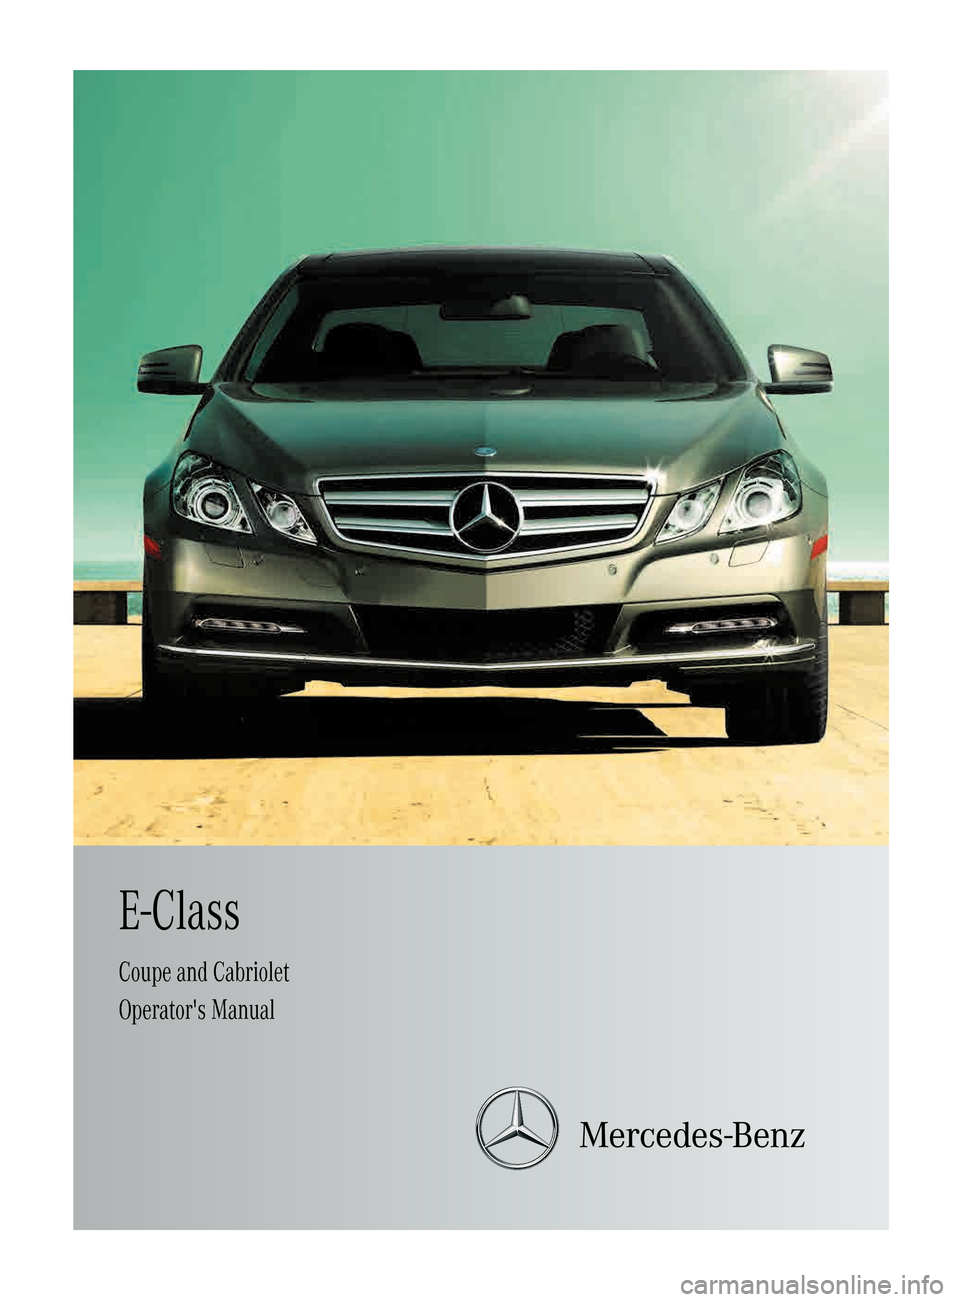 MERCEDES-BENZ E-Class CABRIOLET 2013 C207 Owners Manual 